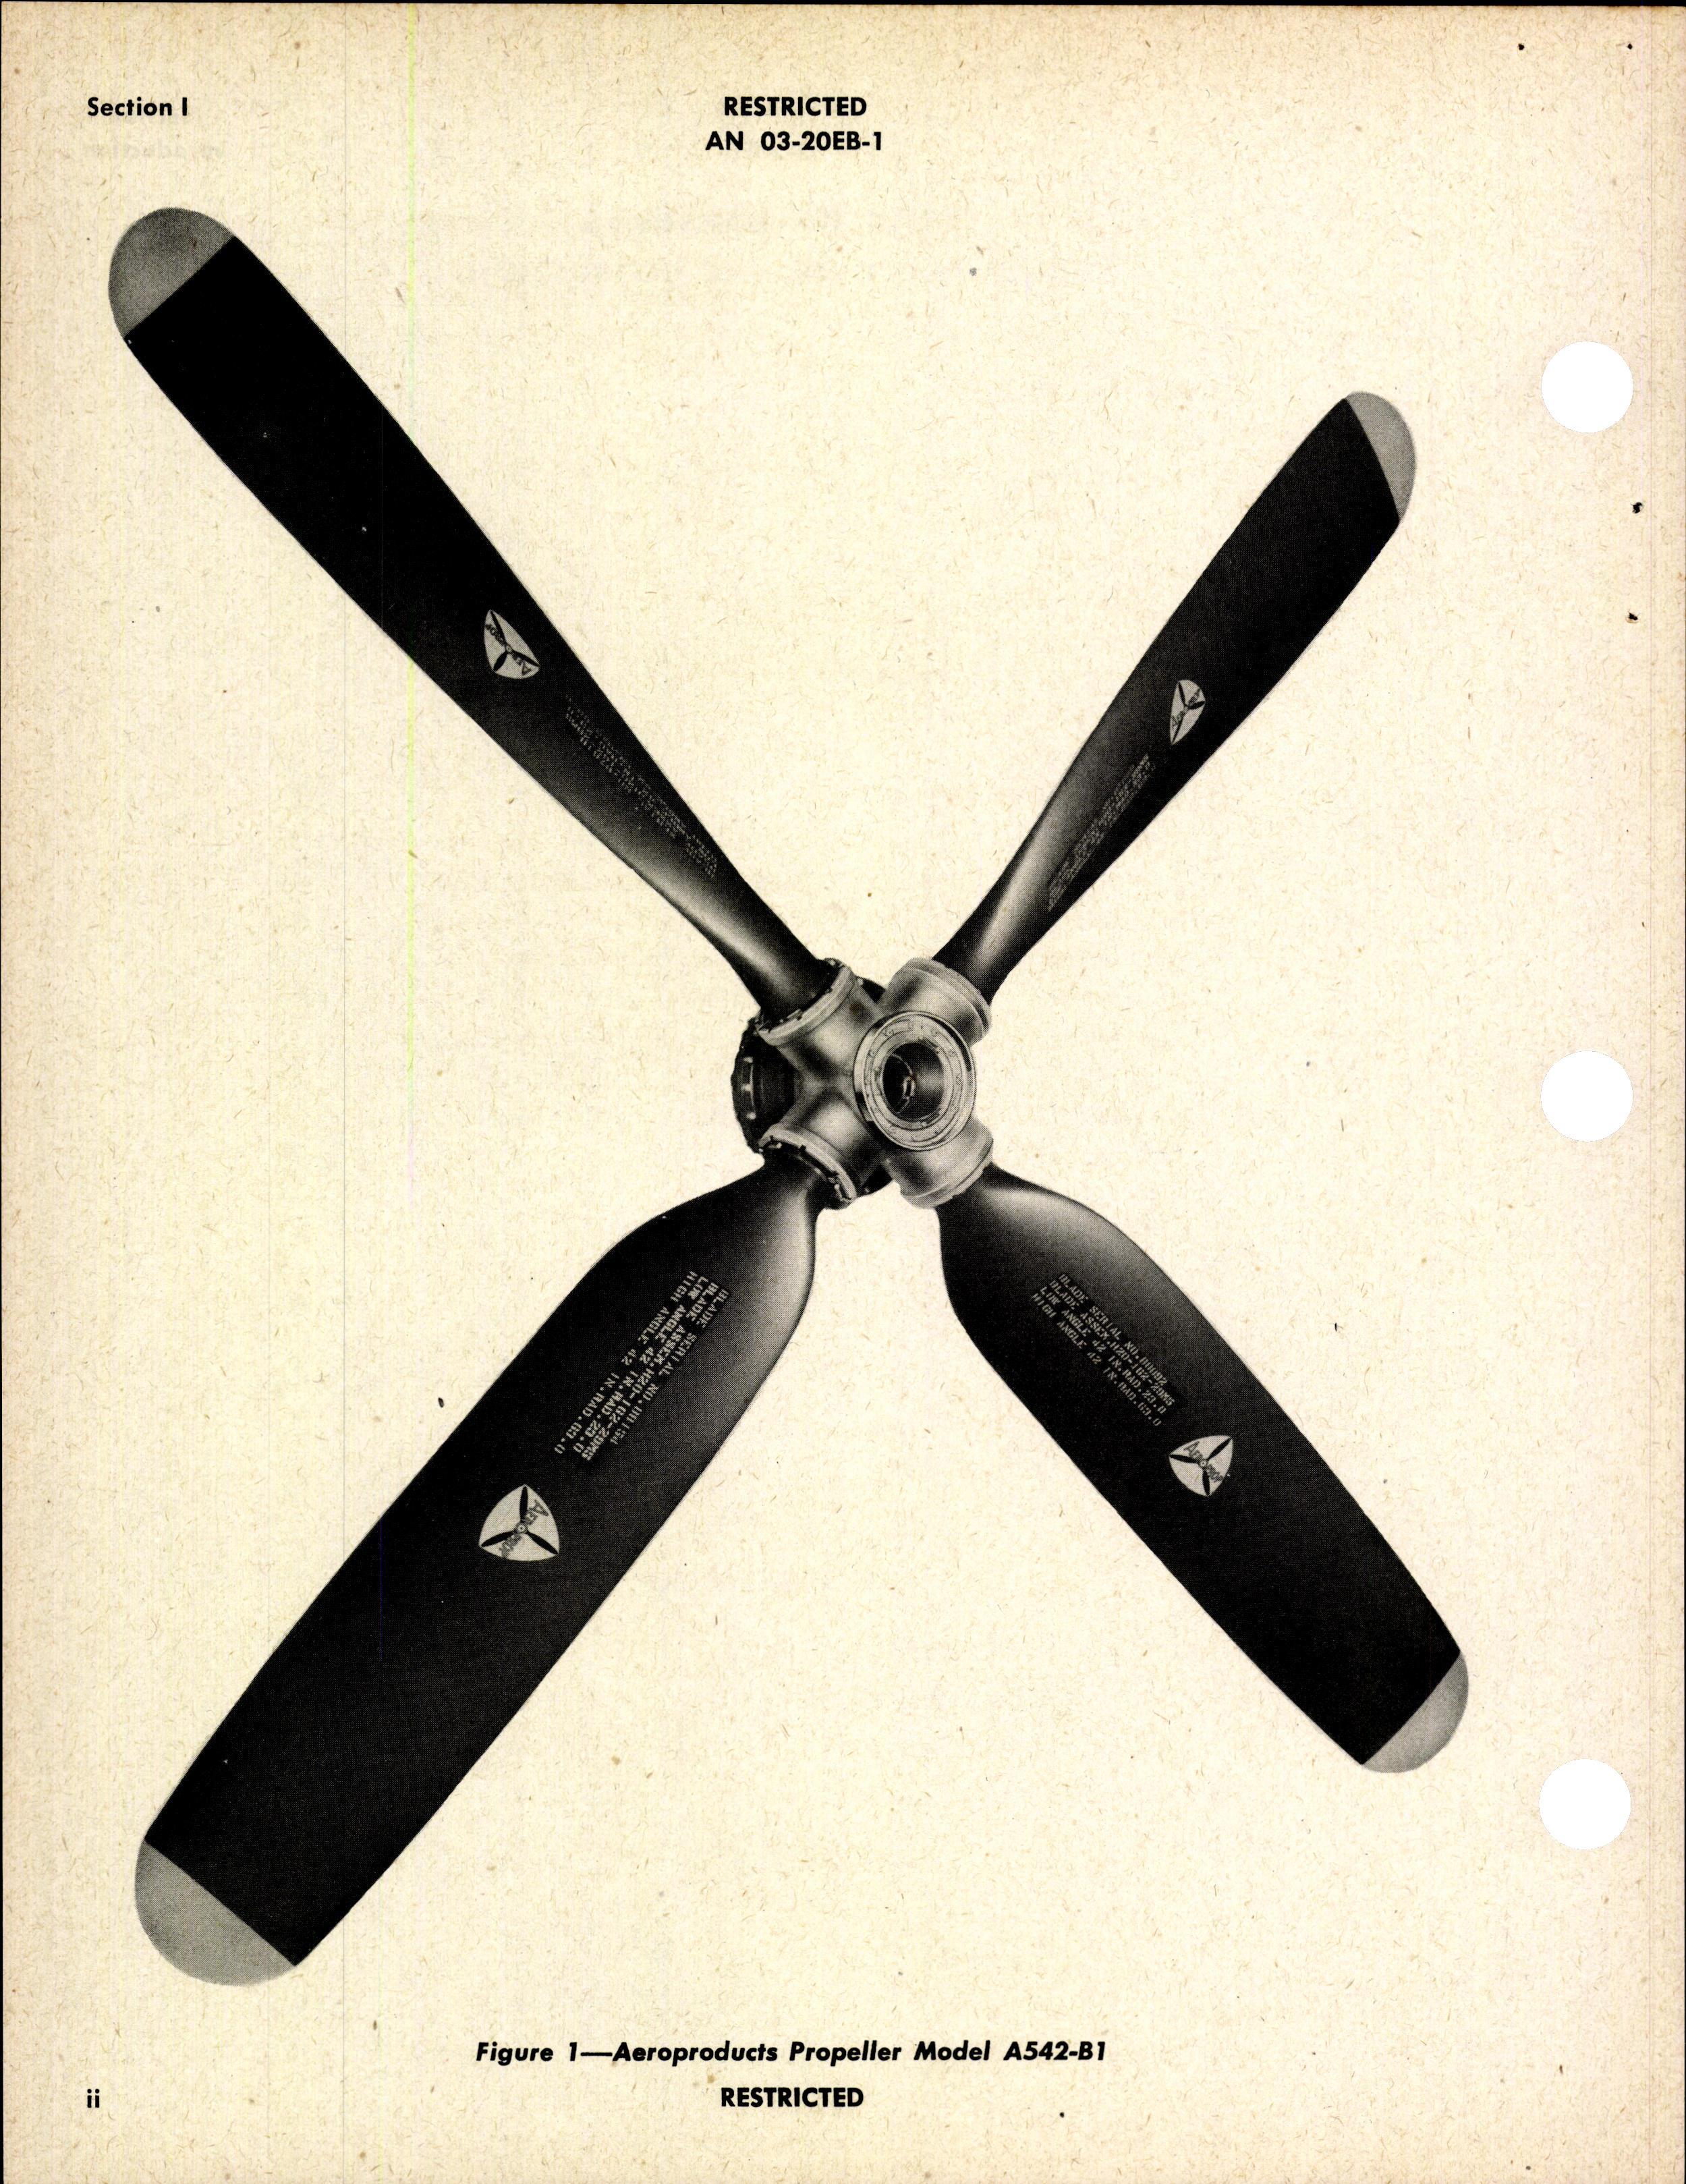 Sample page 4 from AirCorps Library document: Handbook of Instructions with Parts Catalog for Hydraulic Controllable Propellers